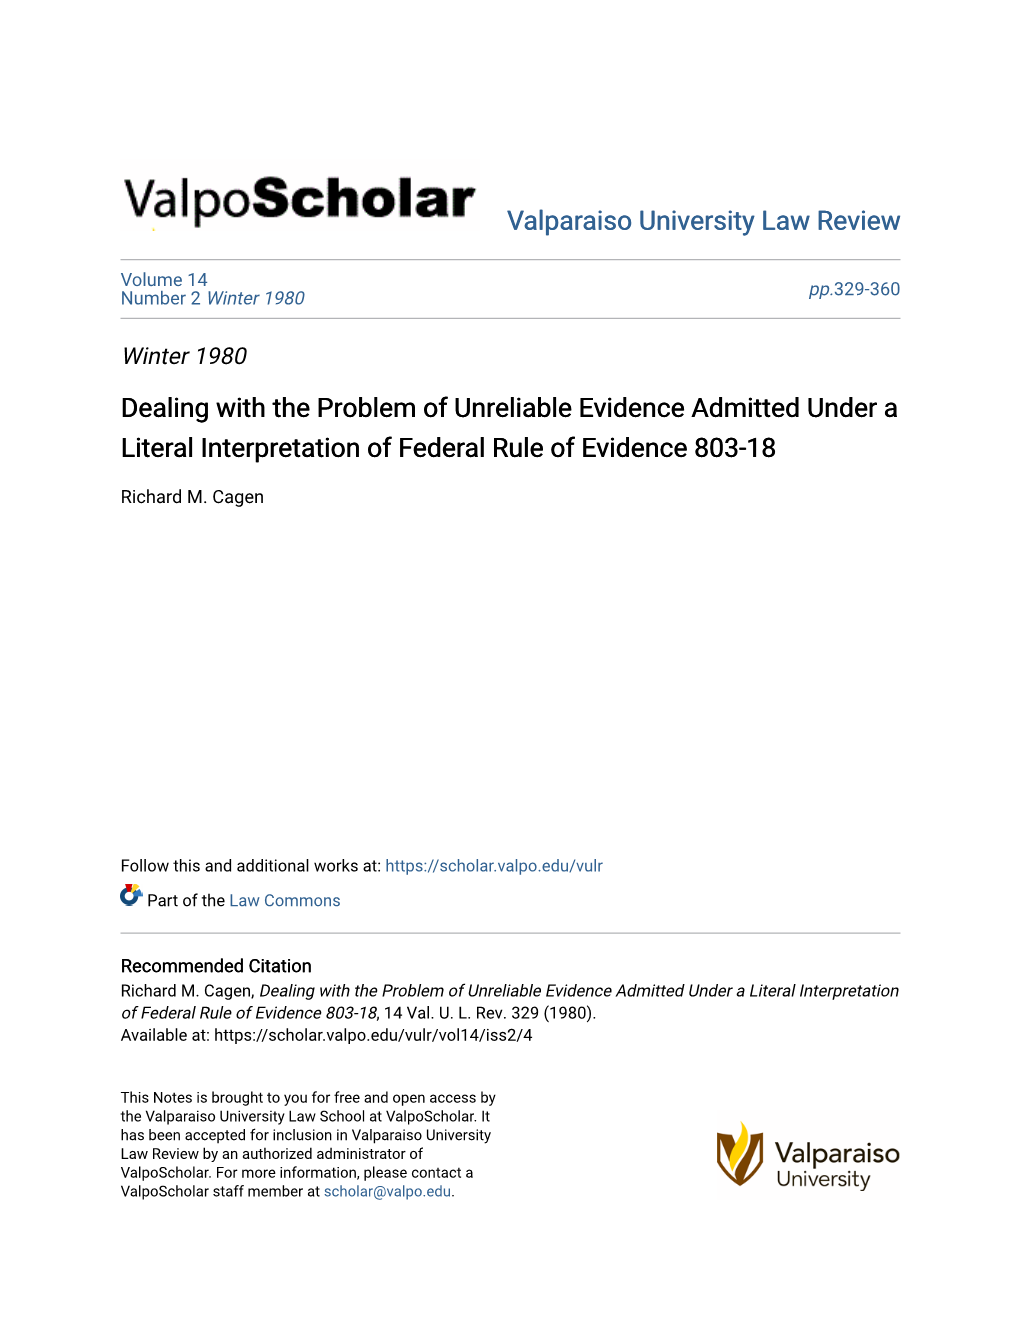 Dealing with the Problem of Unreliable Evidence Admitted Under a Literal Interpretation of Federal Rule of Evidence 803-18